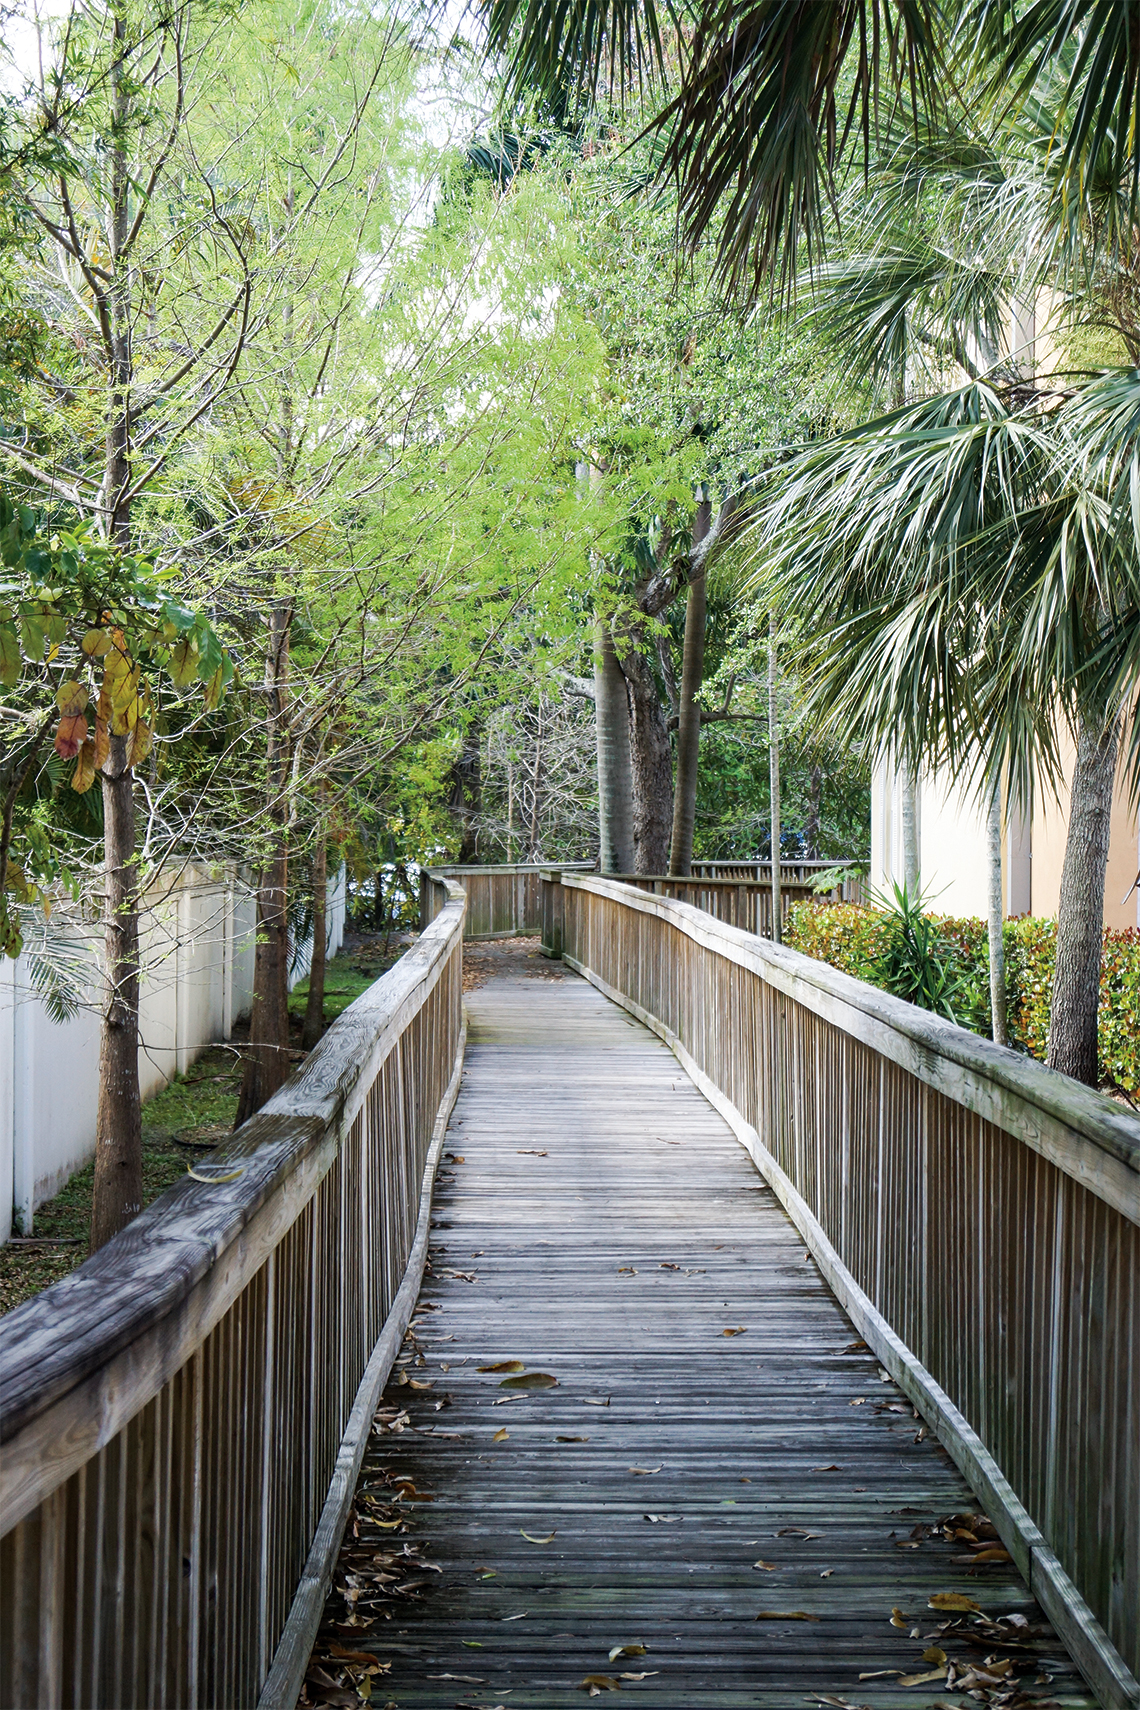 The wooden walkway wraps around several townhomes before making its way to the river.